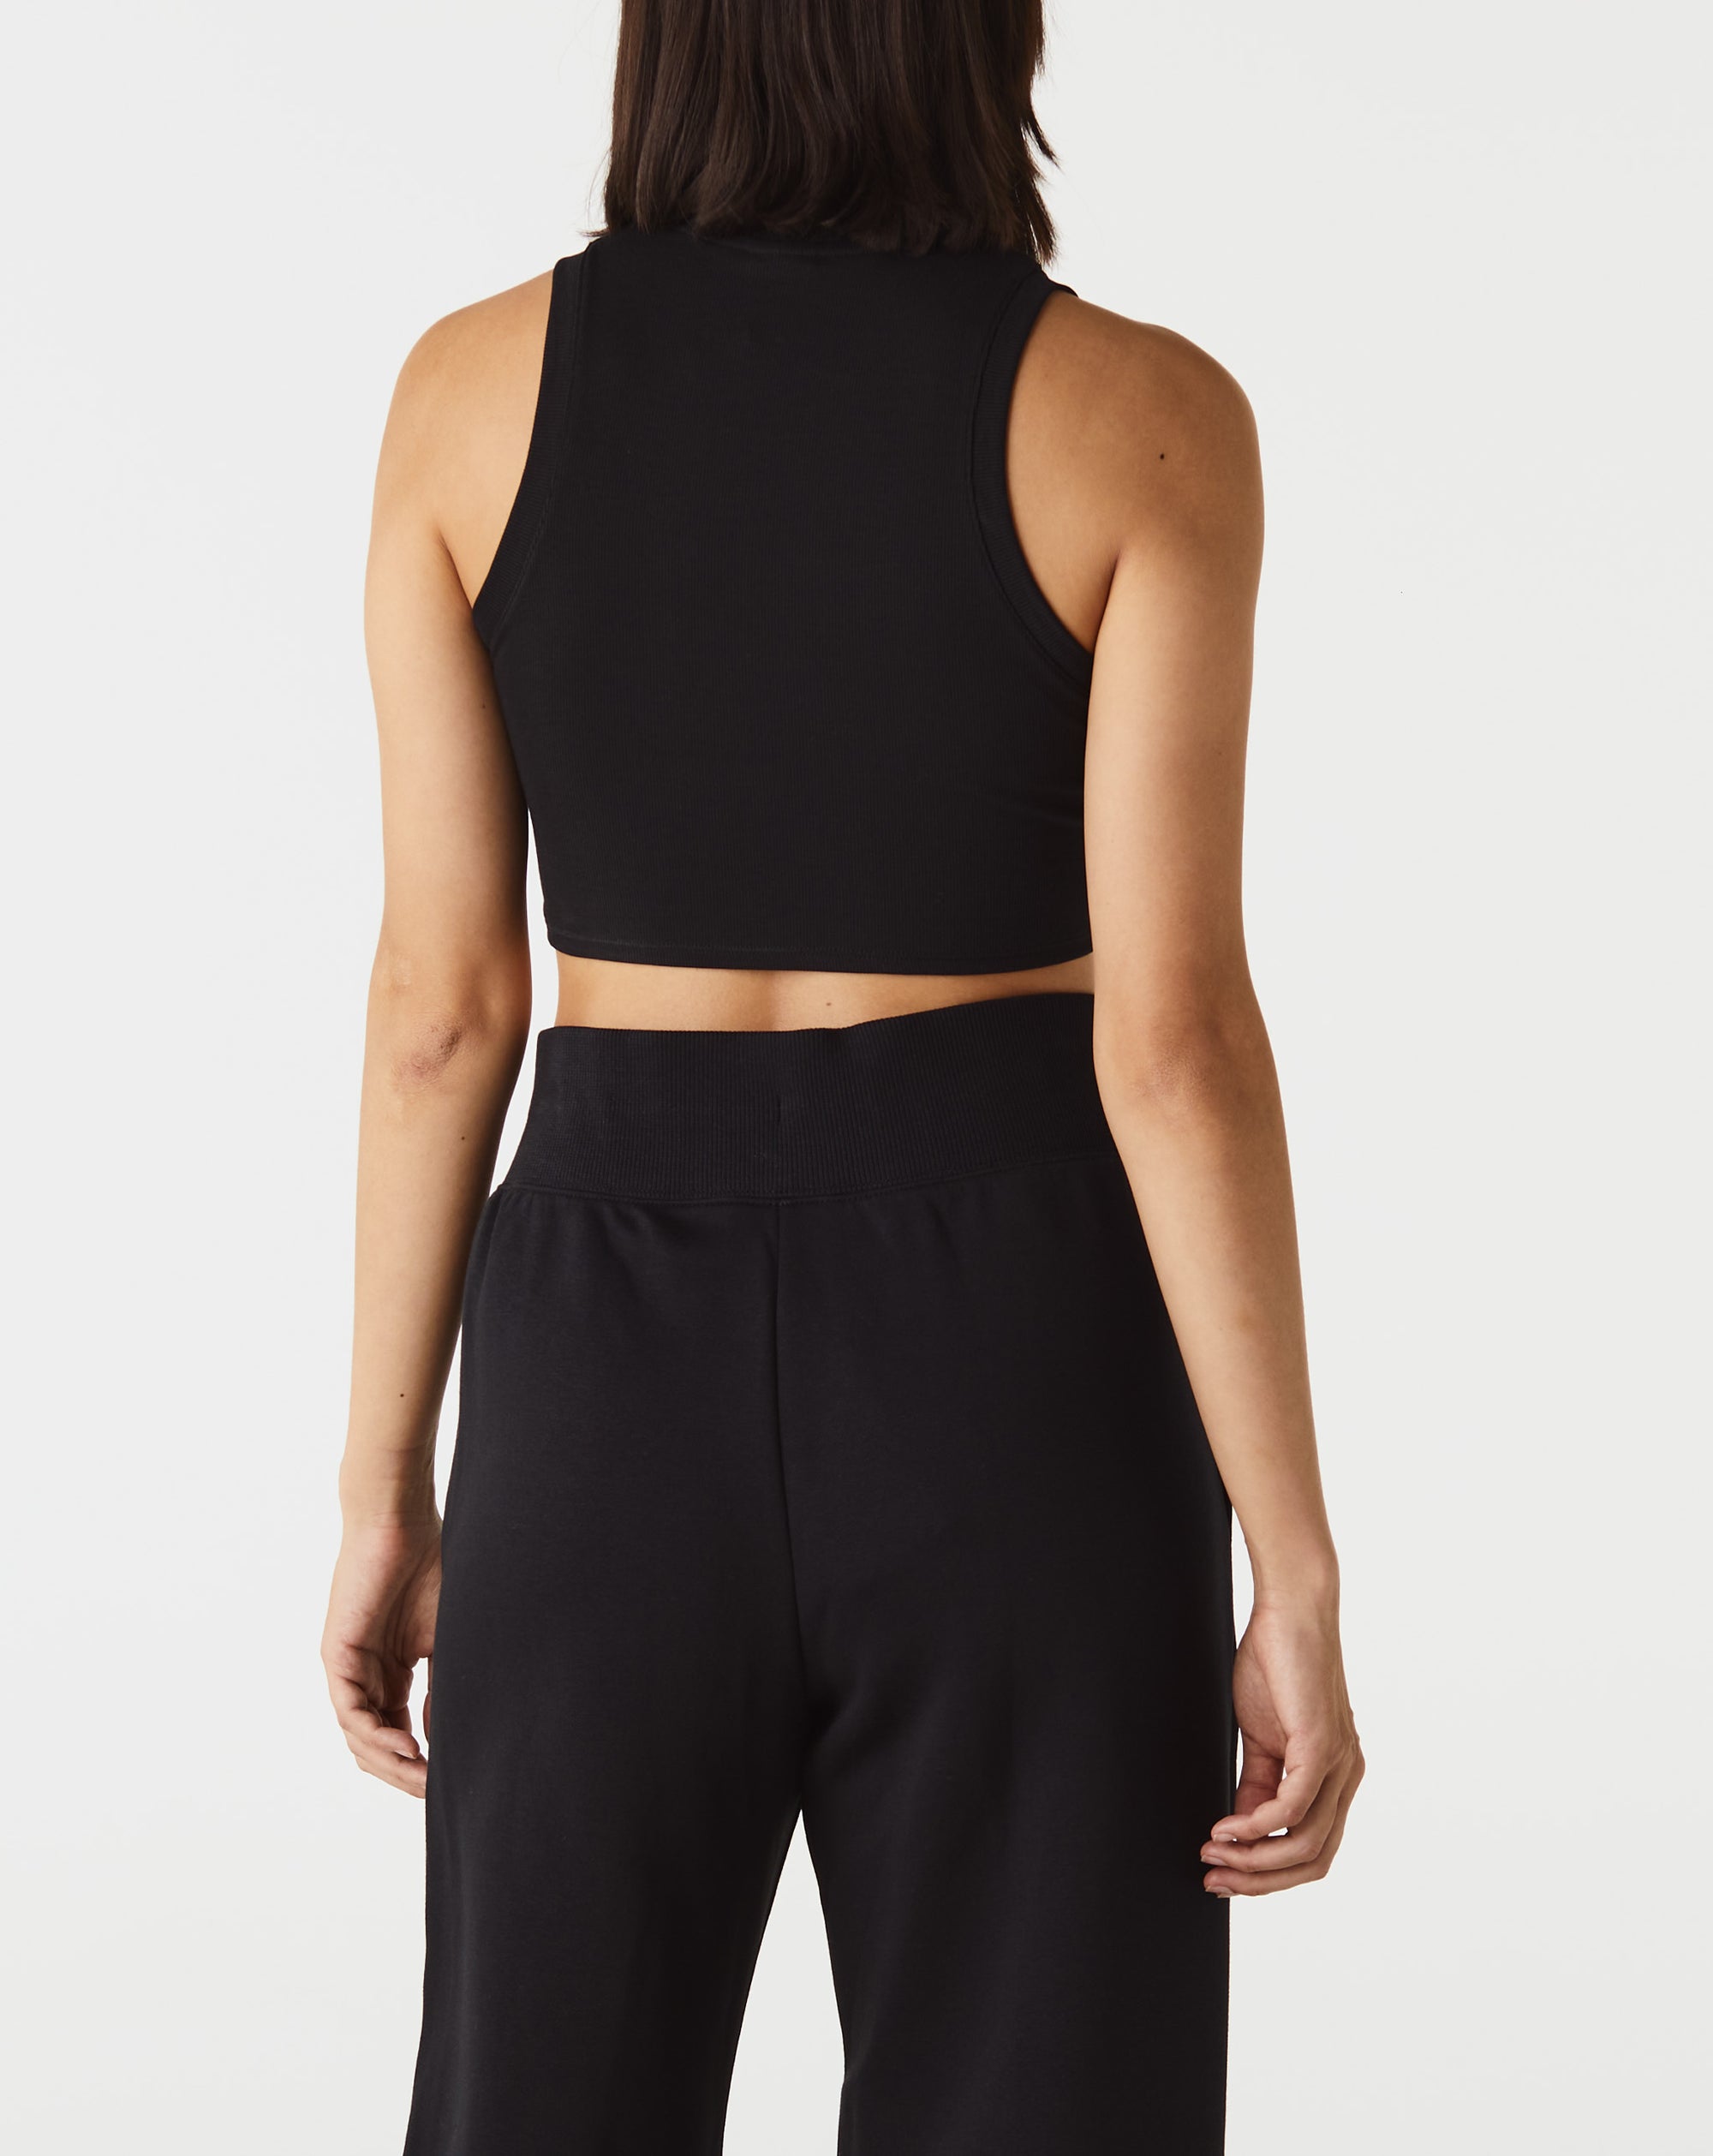 Nike Women's NSW Essentials Ribbed Cropped Tank - Rule of Next Apparel